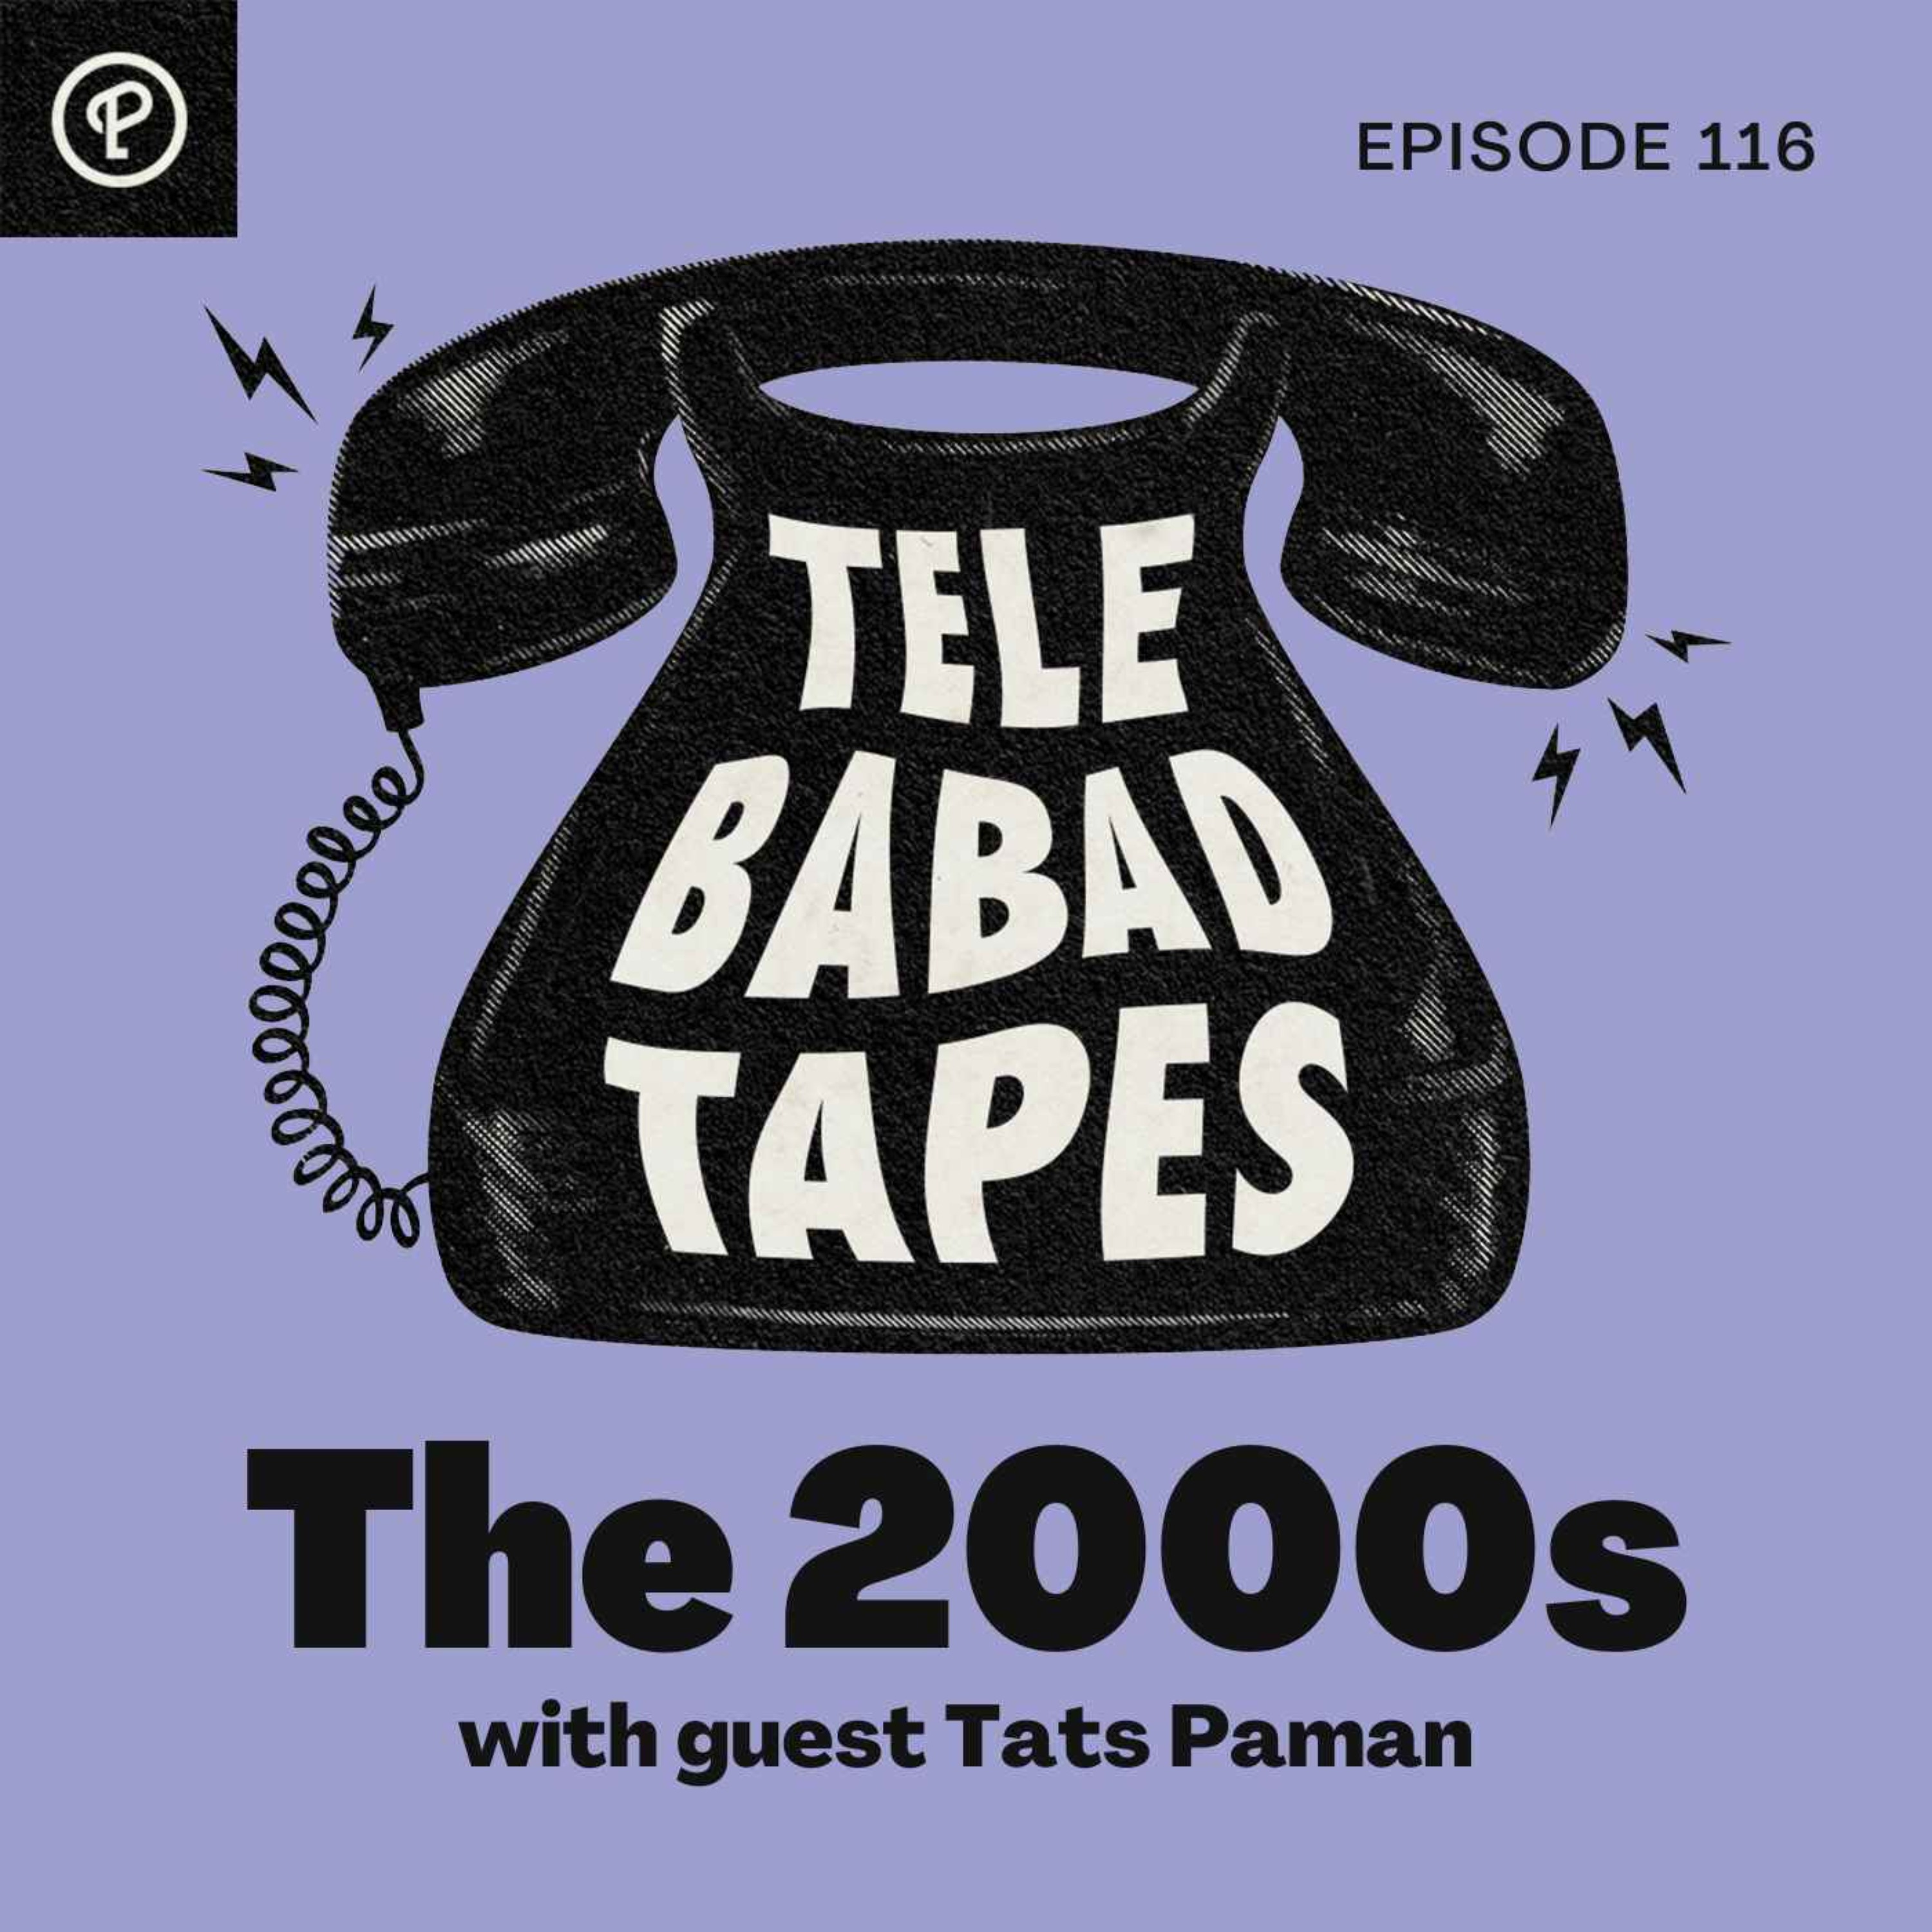 Episode 116: The 2000s with Tats Paman